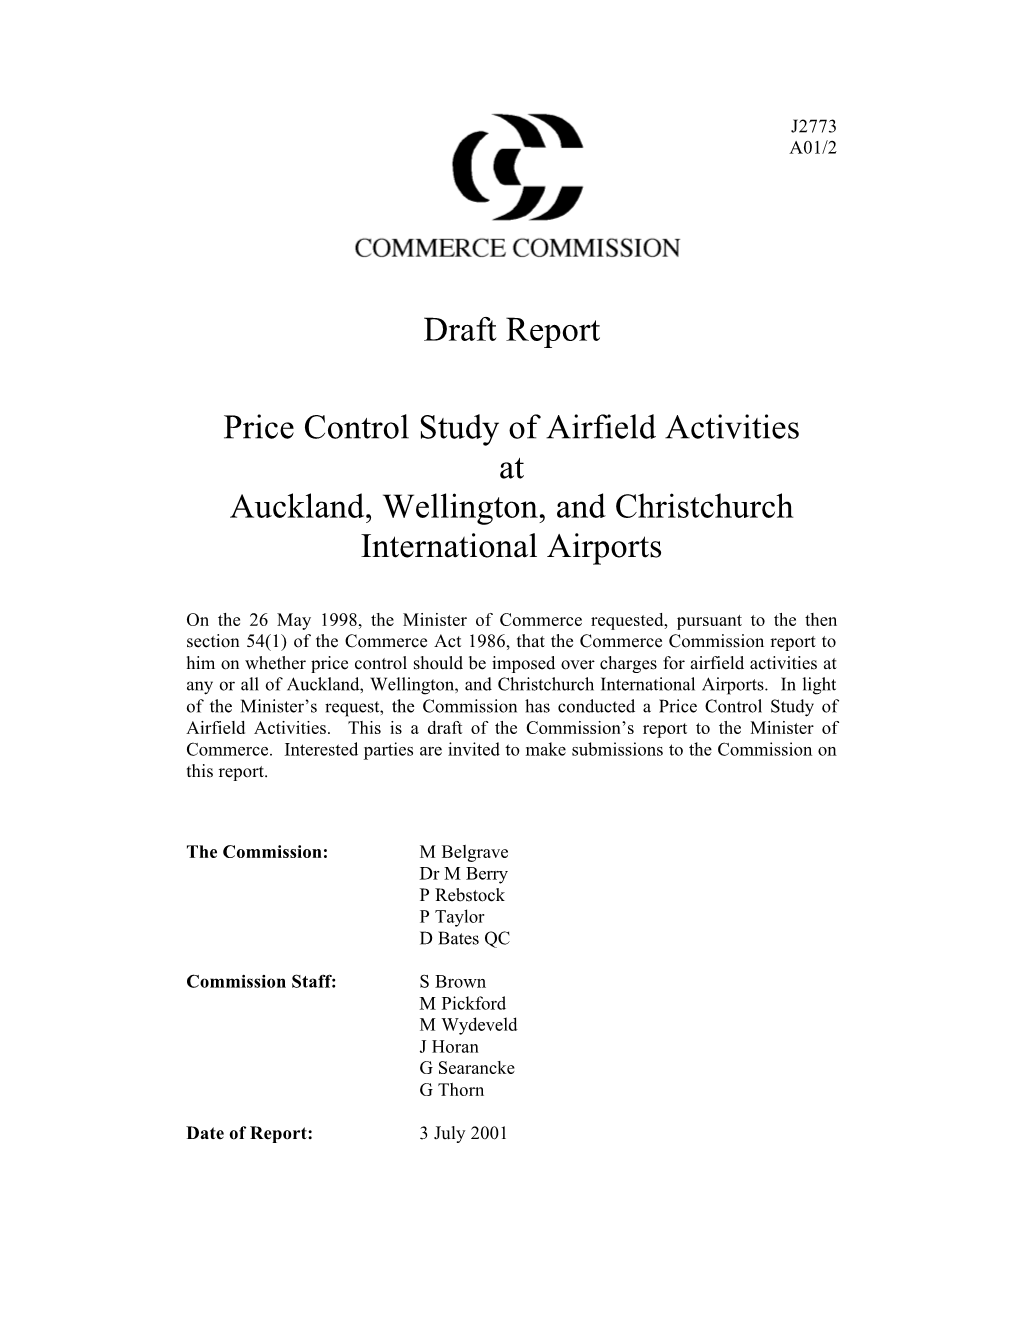 Draft Report Price Control Study of Airfield Activities at Auckland